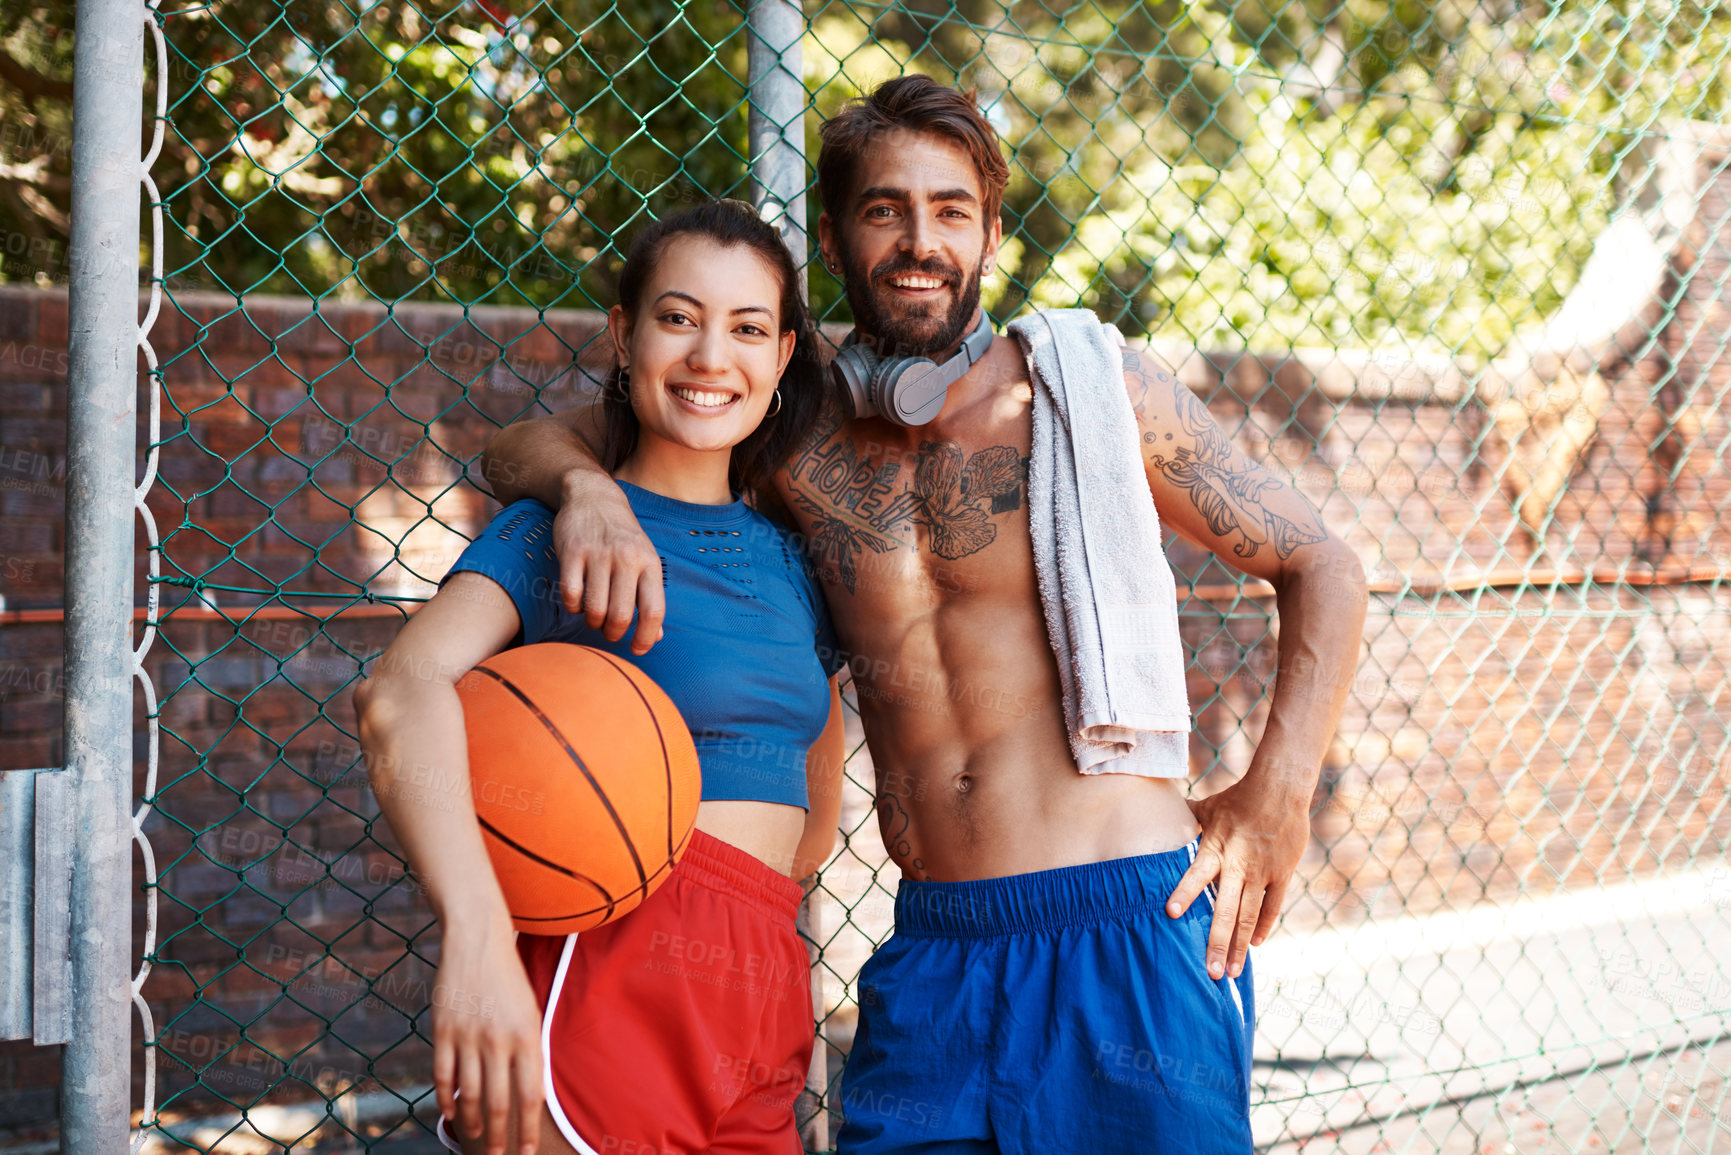 Buy stock photo Portrait of two sporty young people standing against a fence on a sports court